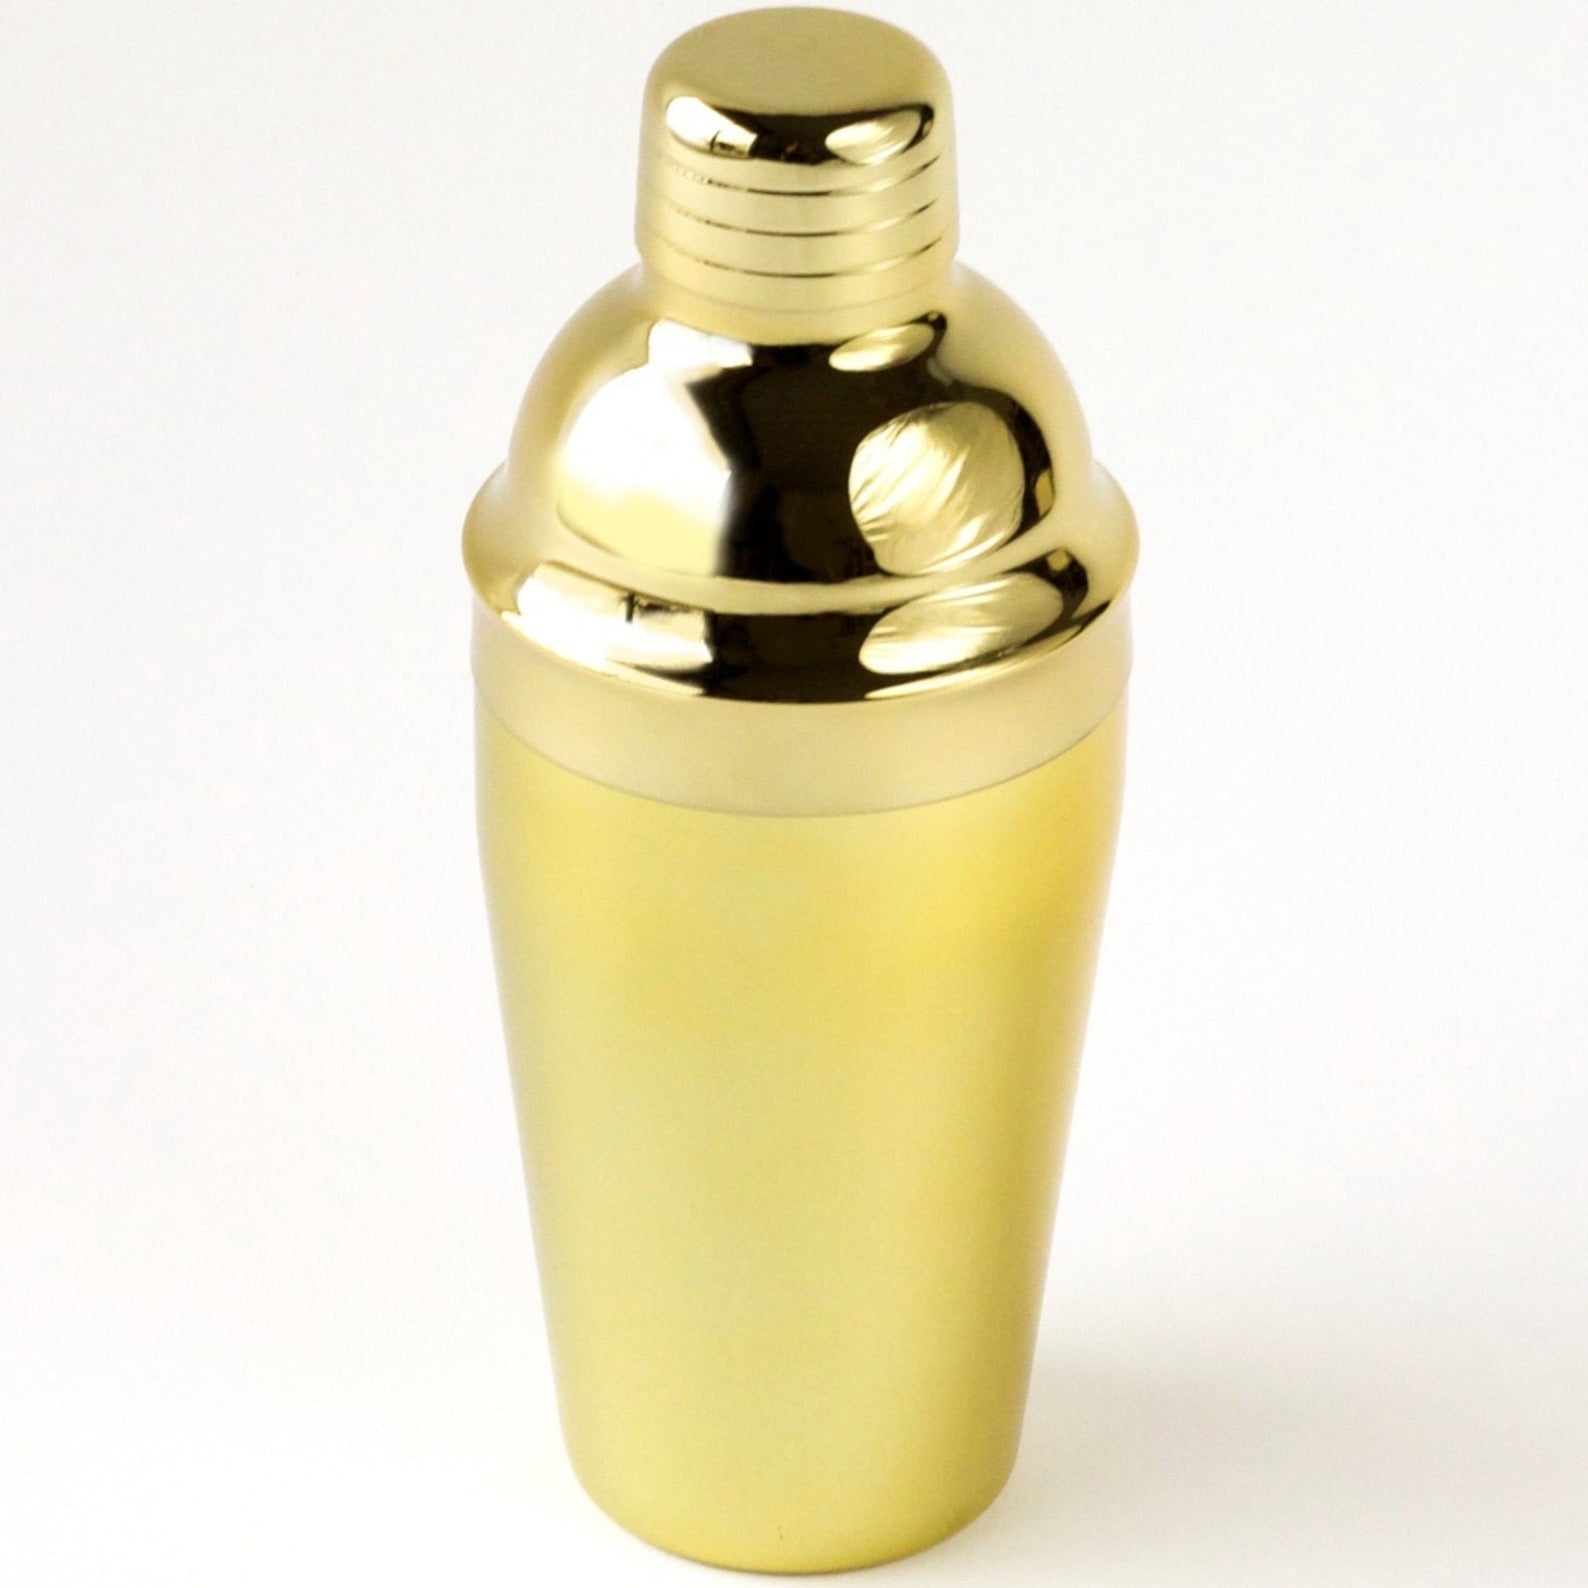 A gold cocktail shaker sitting on a white background.